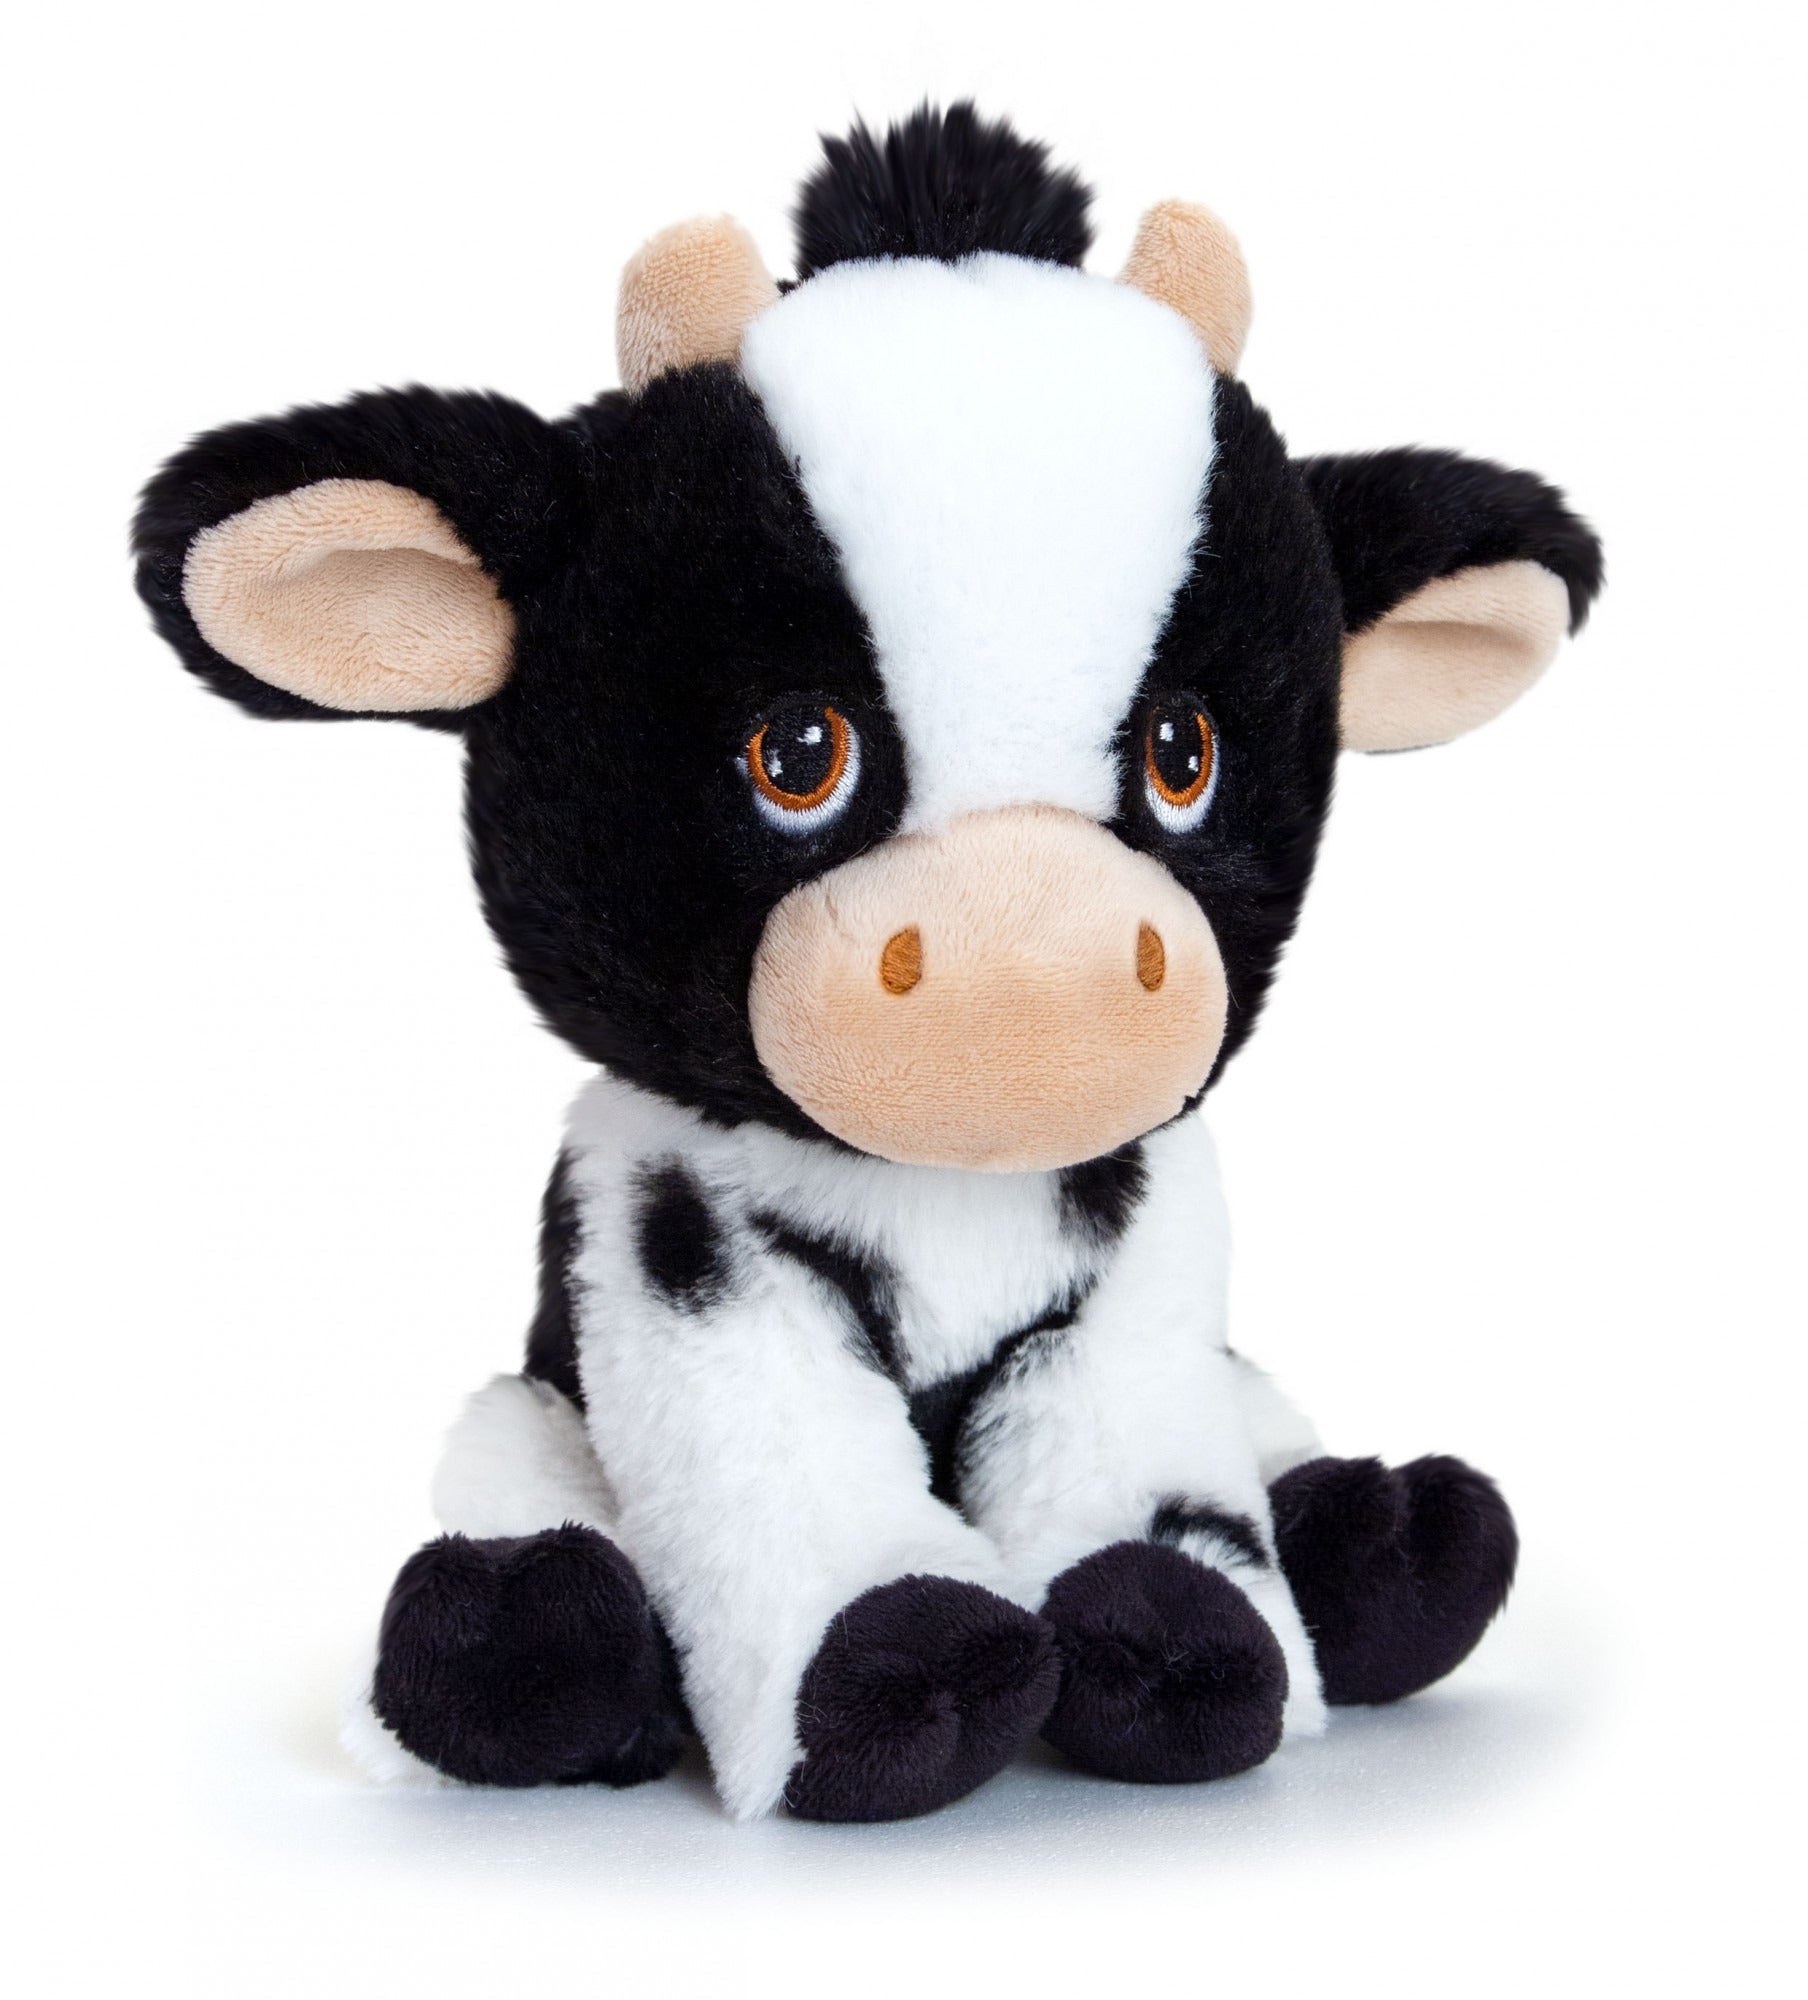 View Keeleco Cow 18cm information